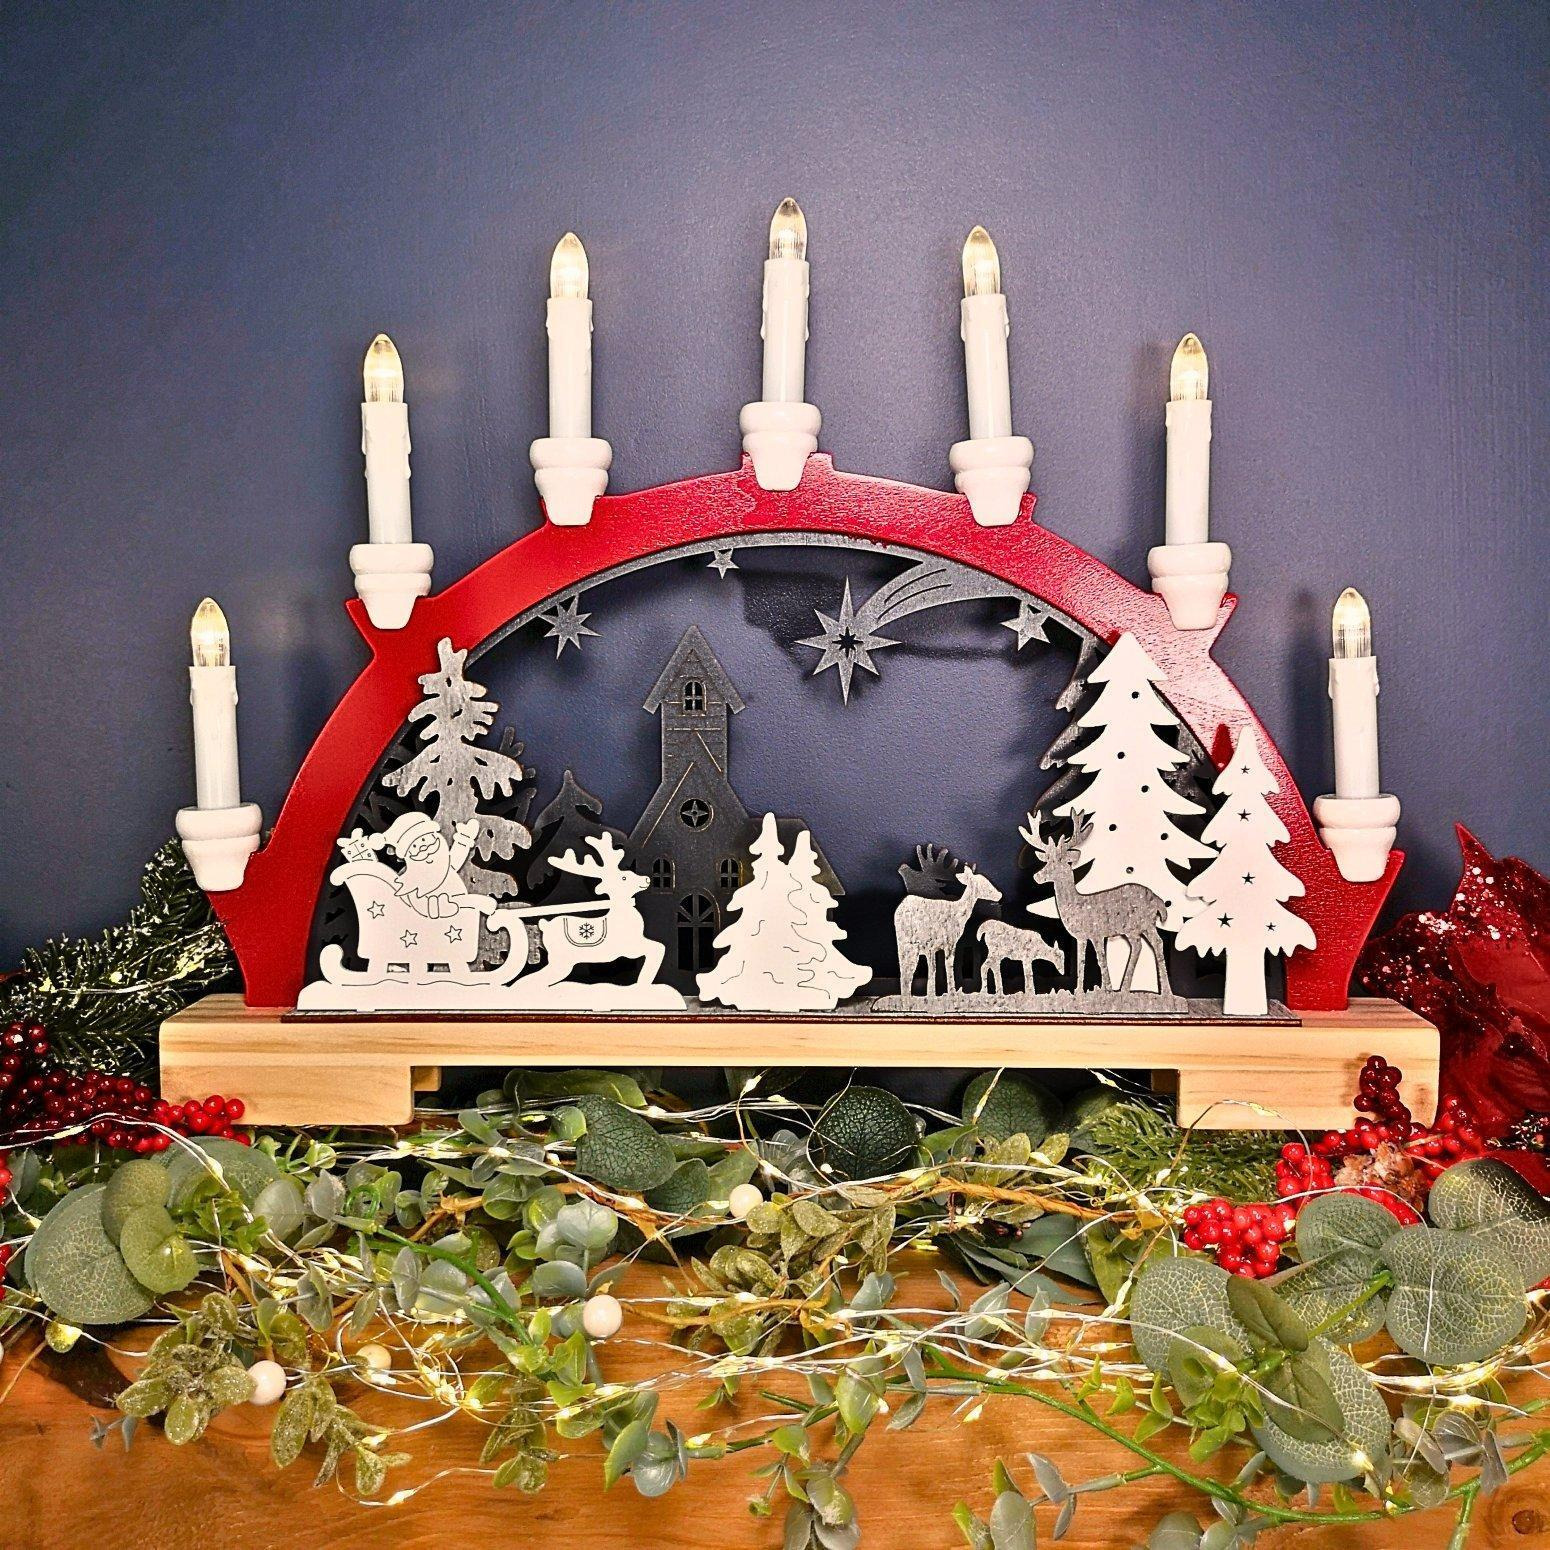 45cm Battery Operated Warm White LED Wooden Arch Santa Sleigh and Reindeer Candle Bridge Christmas Decoration - image 1